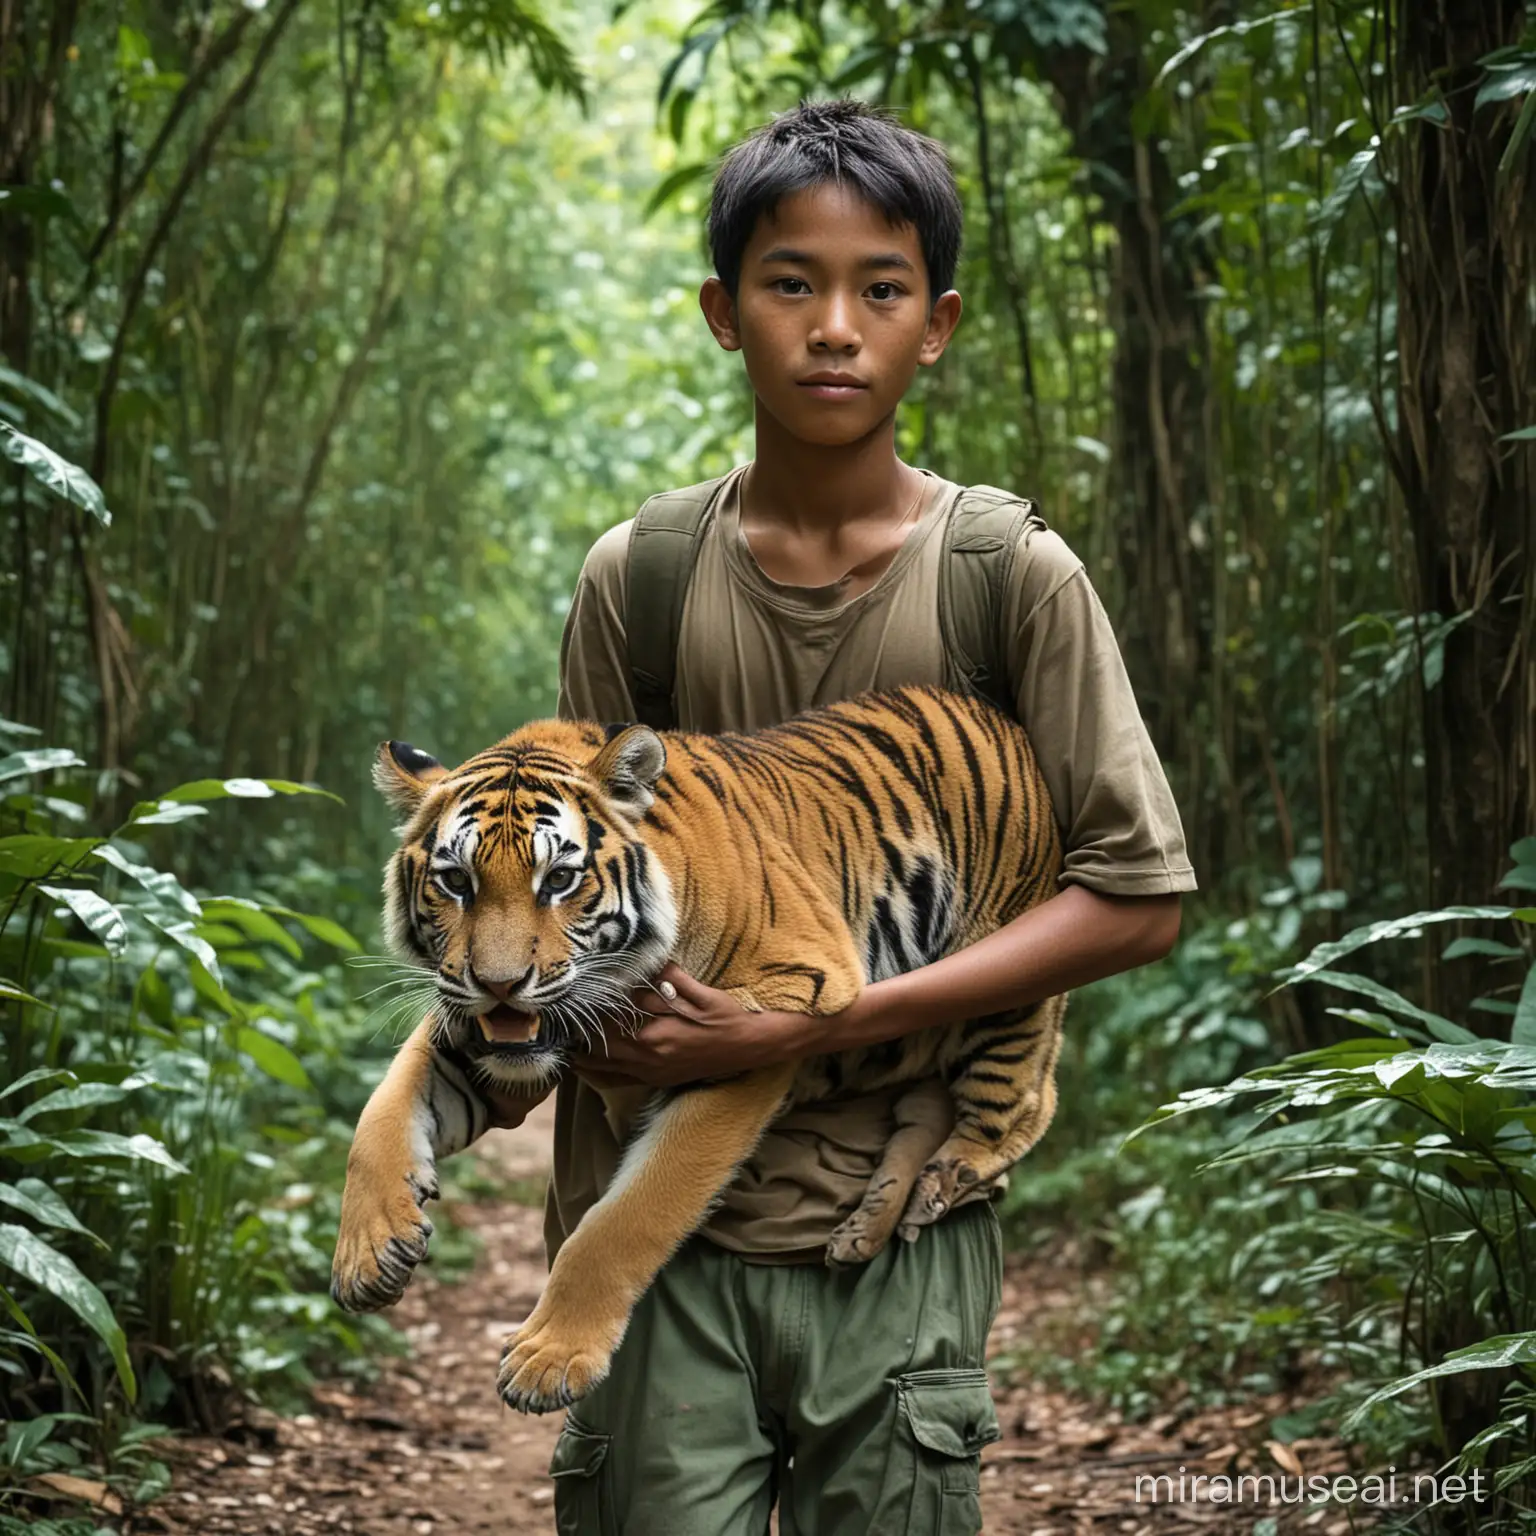 Indonesian Teen with Baby Tiger in Lush Jungle Setting